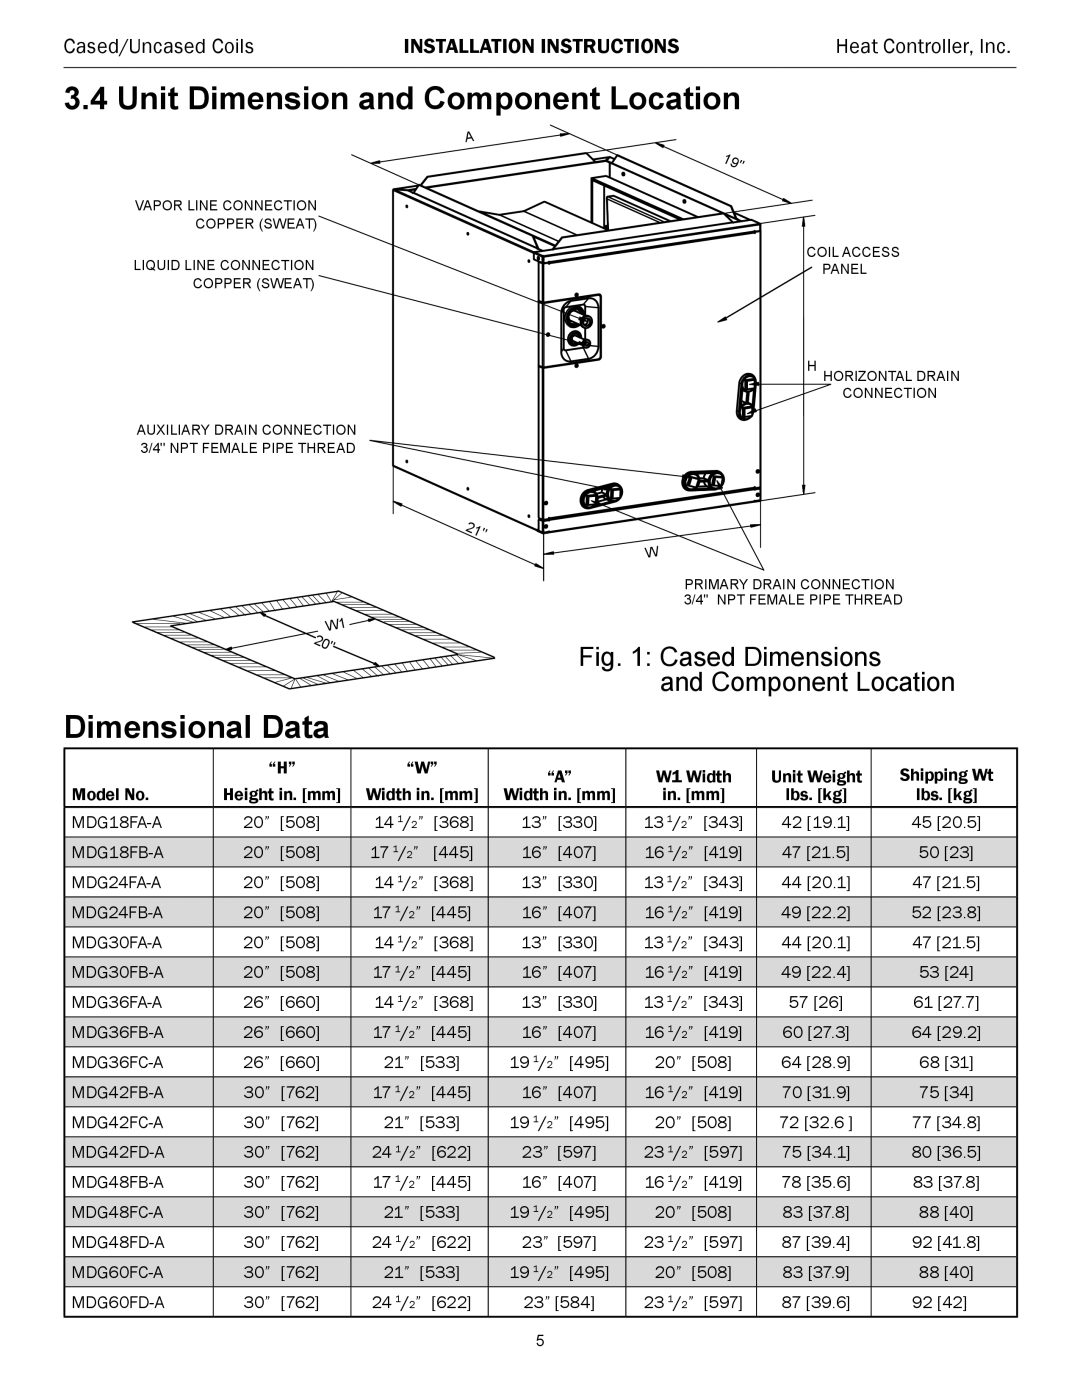 Heat Controller MDG SERIES, CDG SERIES Unit Dimension and Component Location, Dimensional Data, Cased/Uncased Coils 